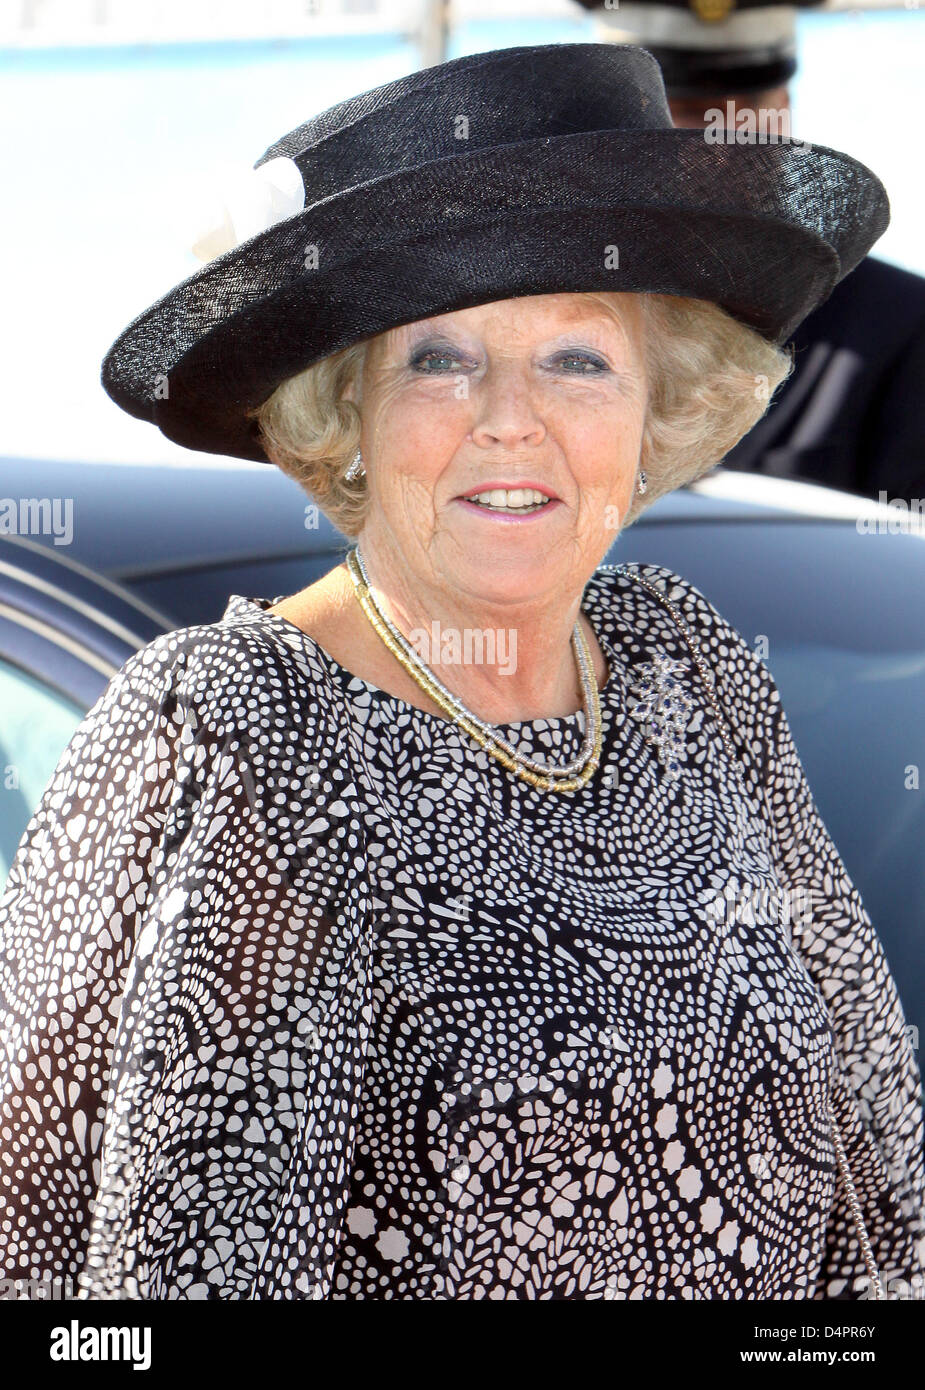 Queen Beatrix of the Netherlands arrives to christen the new ship of transport company Royal Wagenborg in the harbour of Delfzijl, the Netherlands, 24 August 2009. The ship can transport 14.000 tons  and is 154 meters long and 17 meters wide. Royal Wagenborg celebrates its 111th anniversary. Photo: Patrick van Katwijk Stock Photo